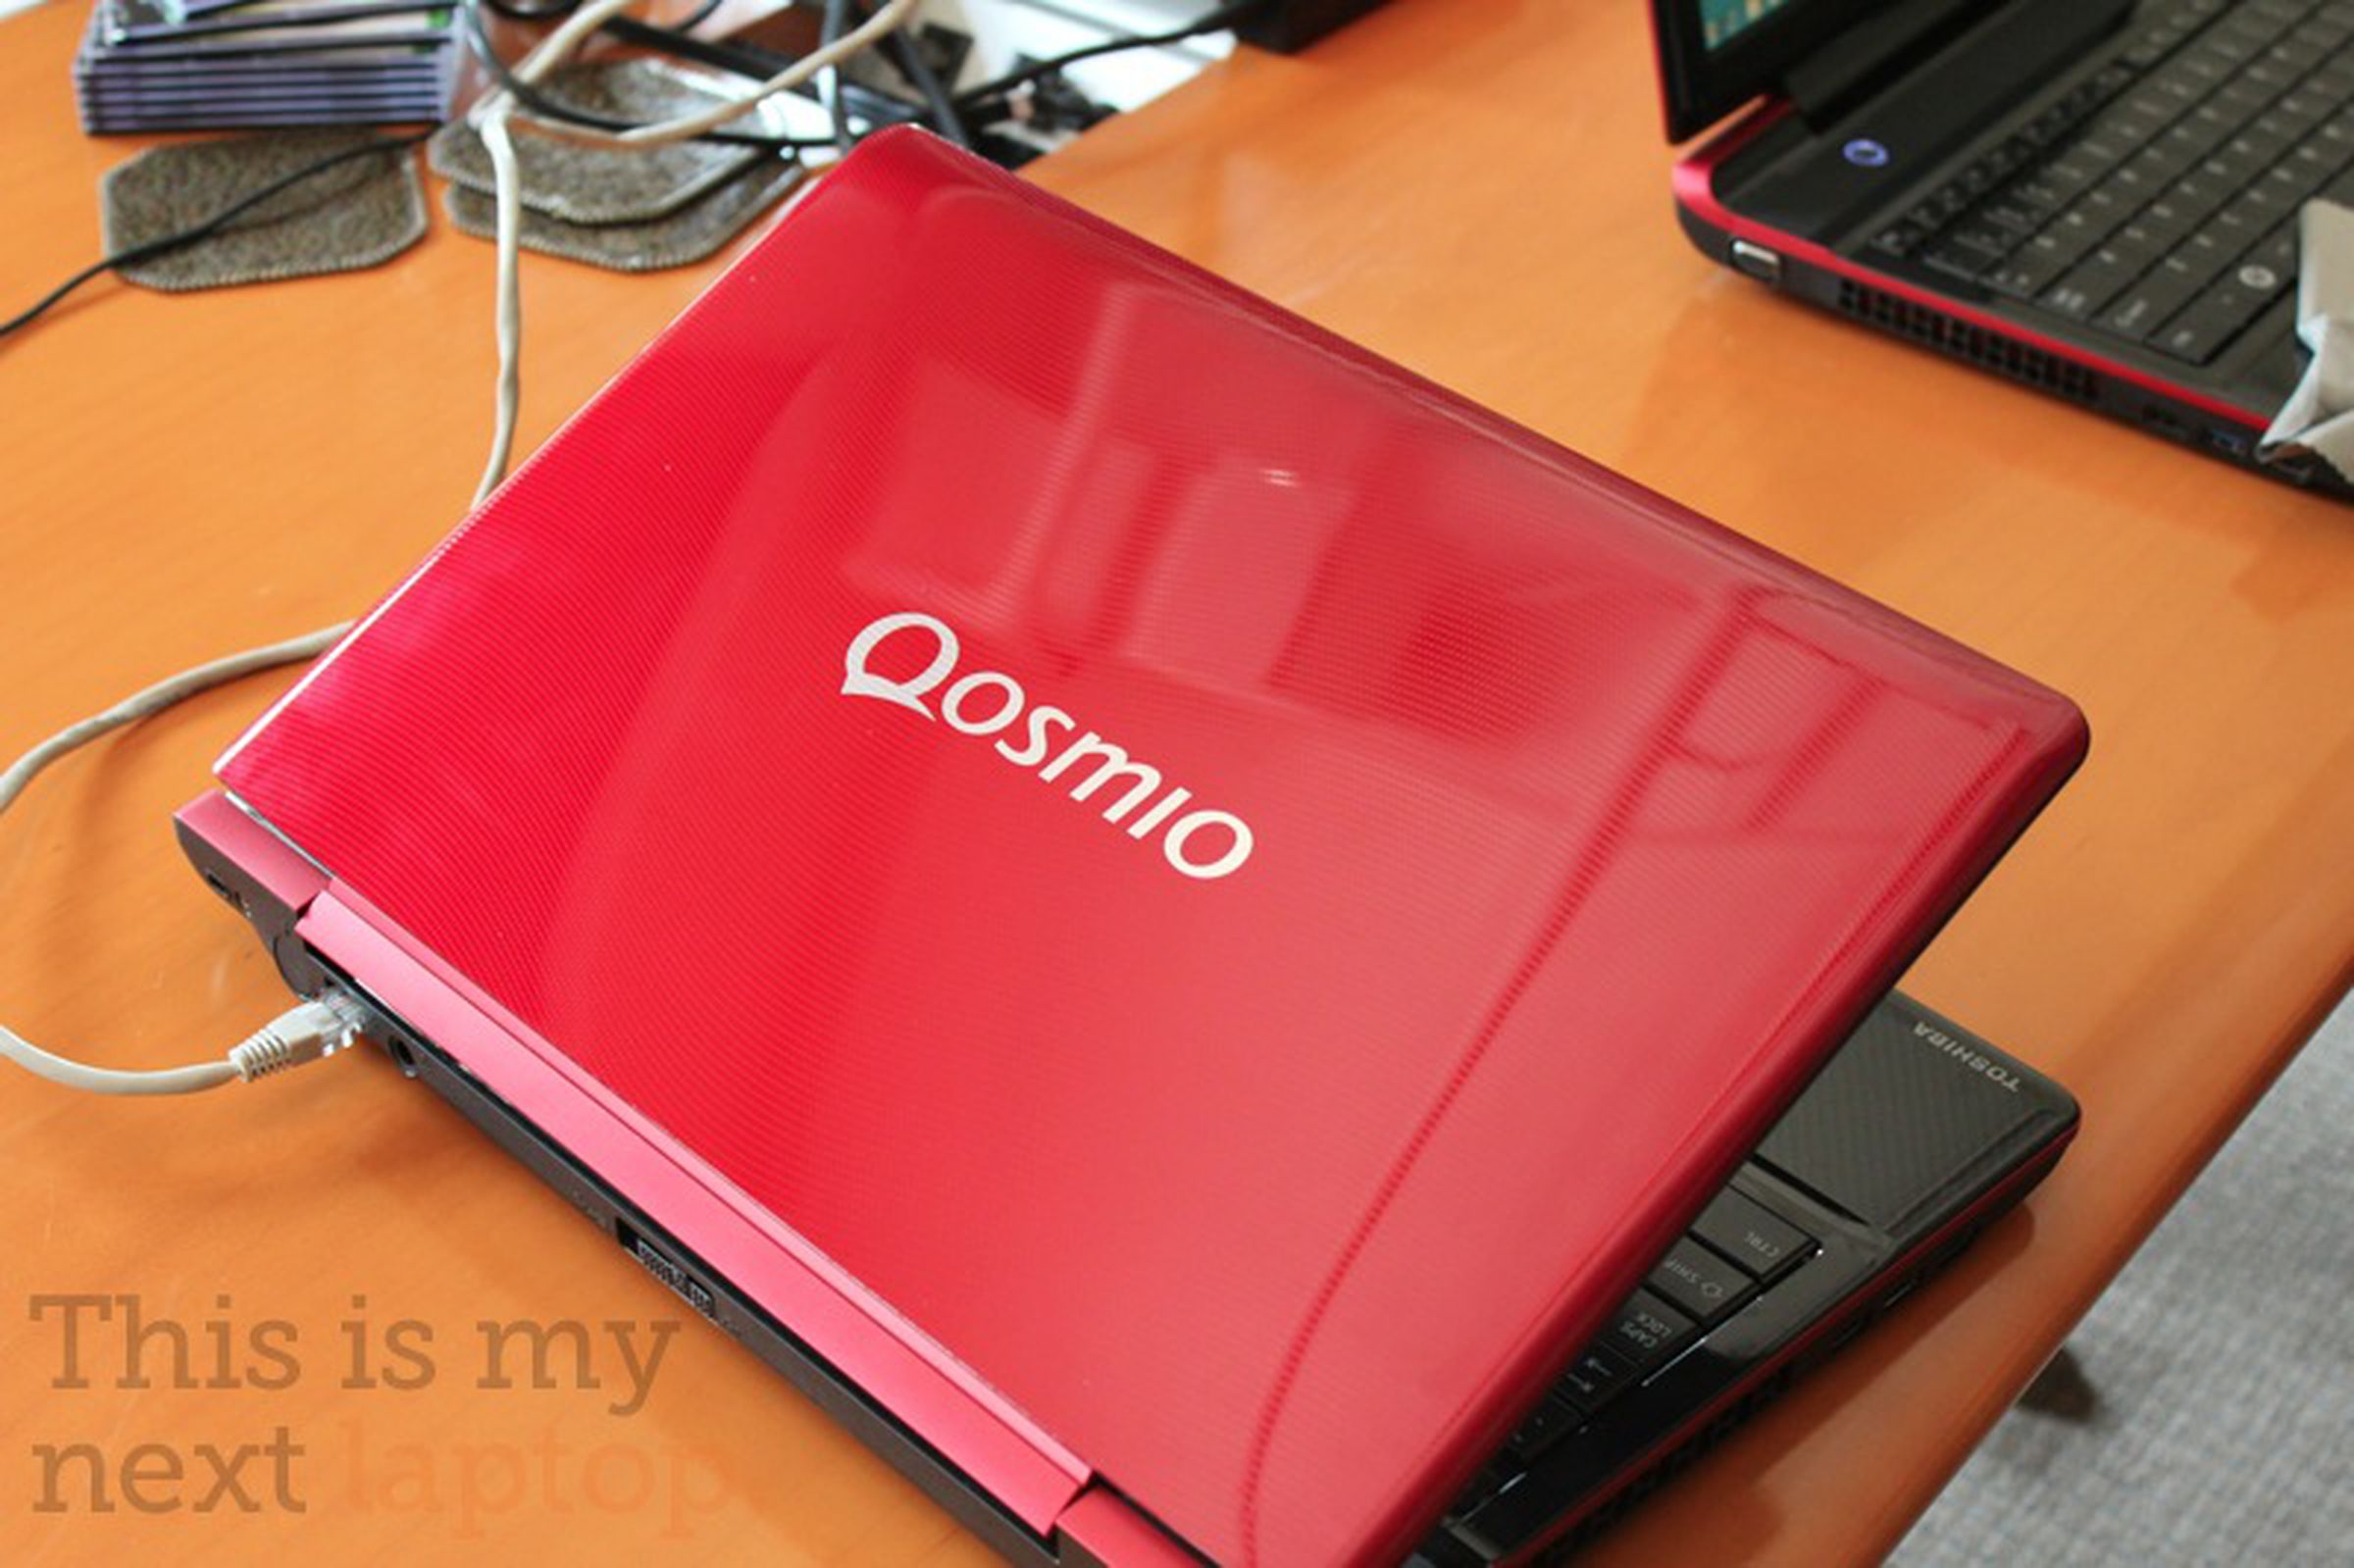 Toshiba’s glasses-free 3D Qosmio F755 arrives August 16th for $1,699 sans gaming support